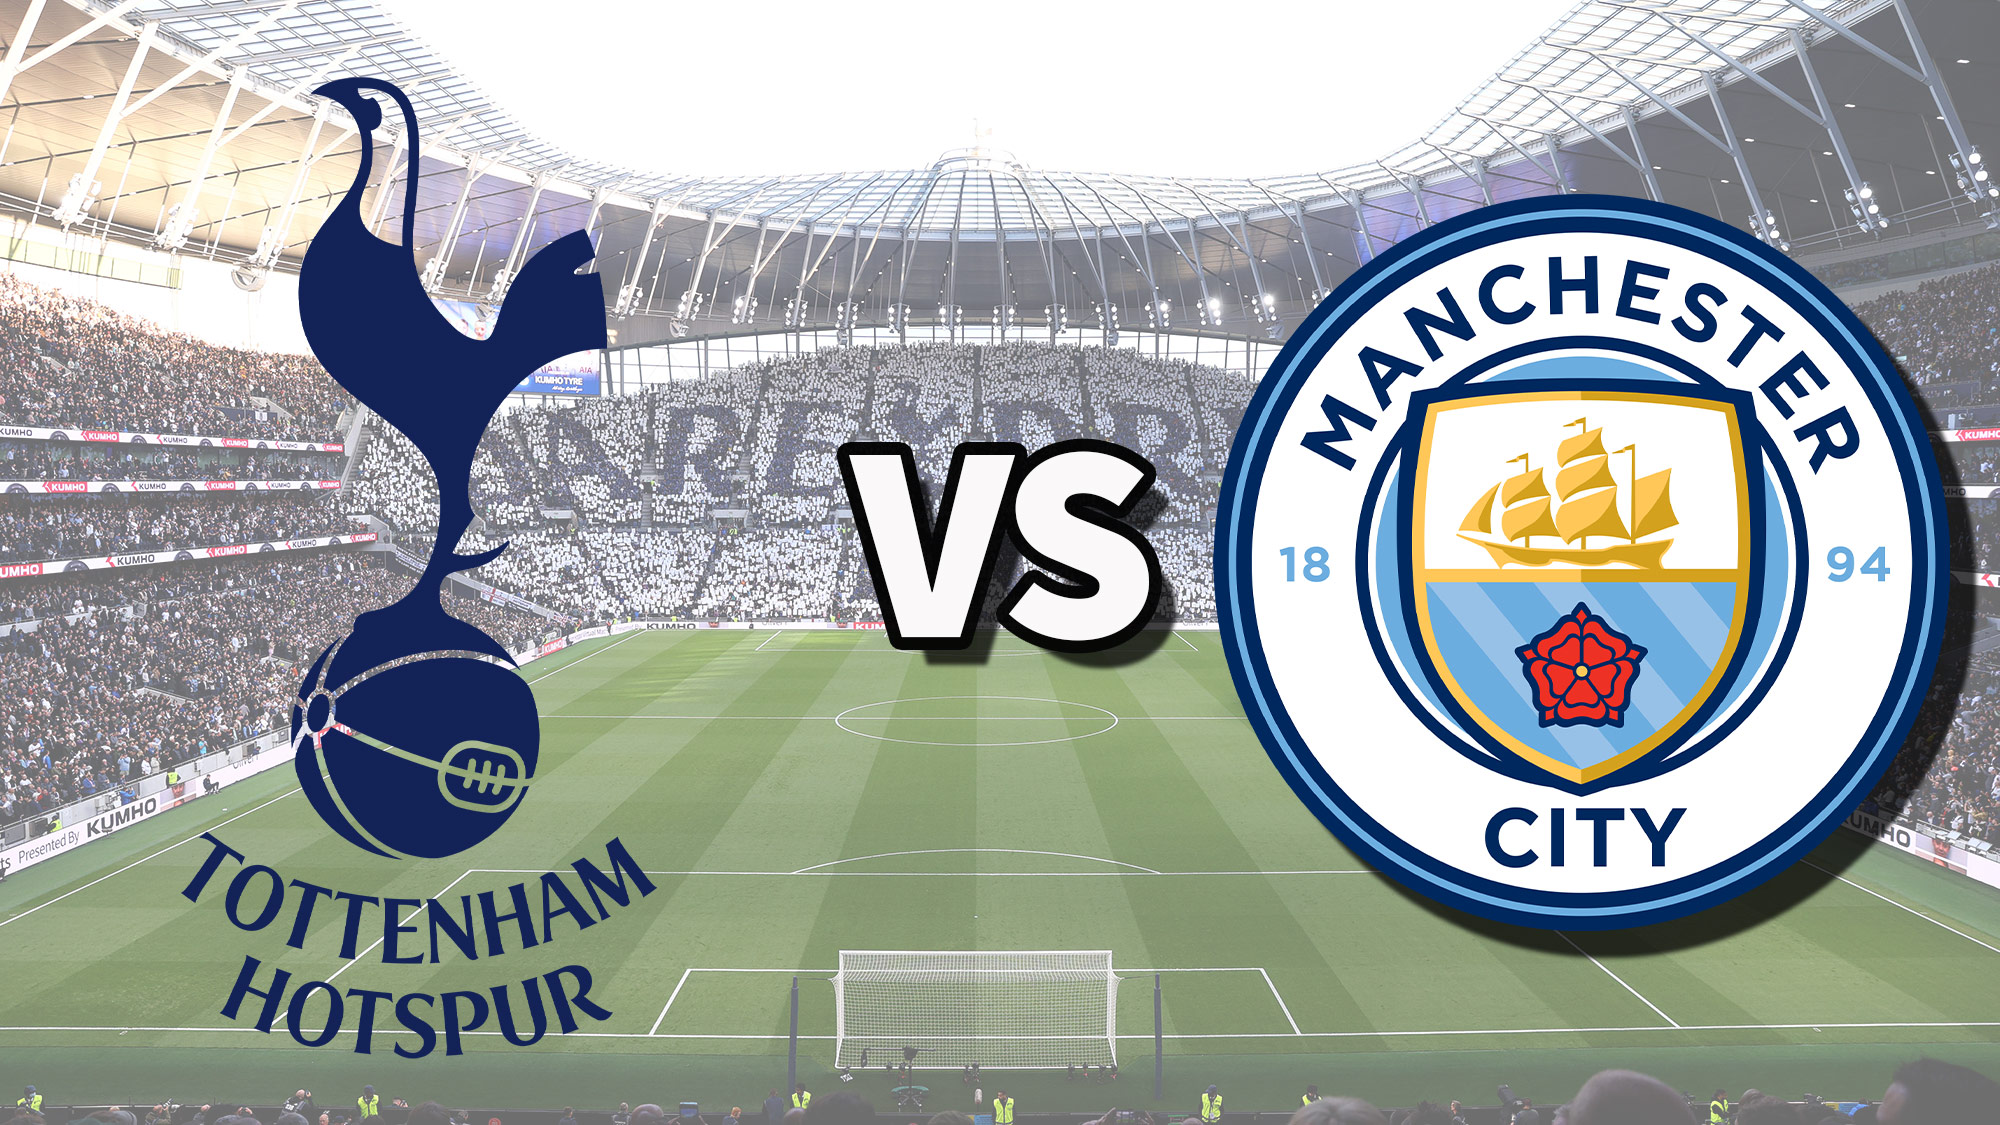 Manchester City vs. Tottenham Hotspur: game time, live blog, and